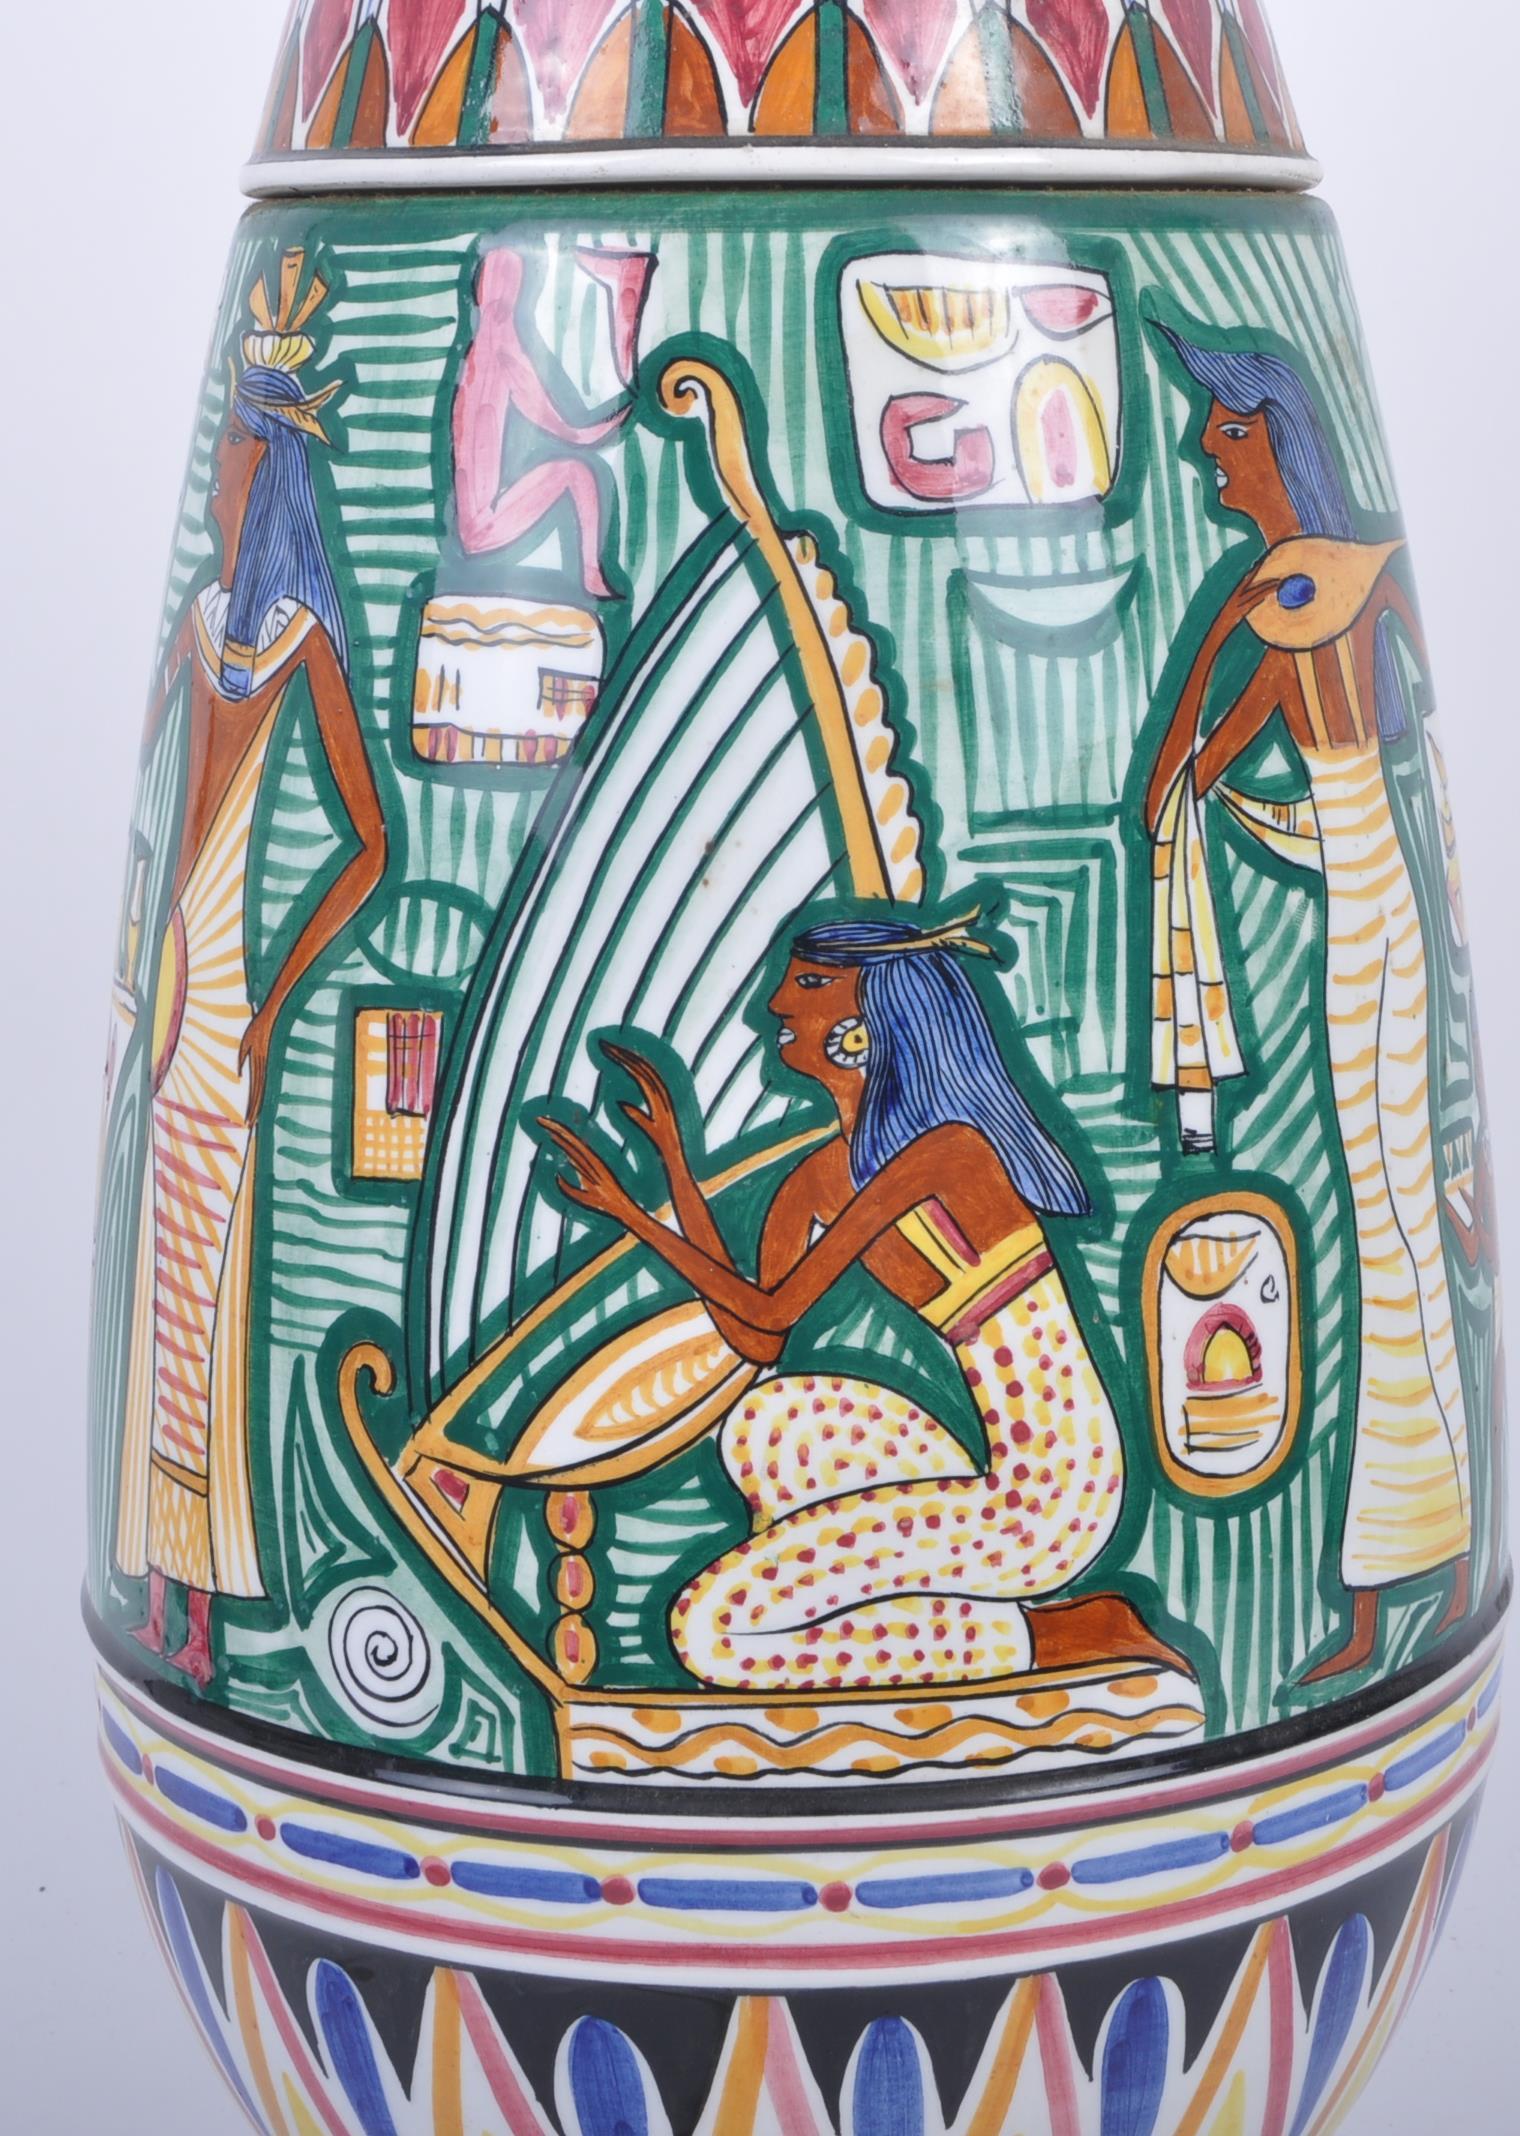 VINTAGE 20TH CENTURY EGYPTIAN INSPIRED TABLE LAMP - Image 6 of 9